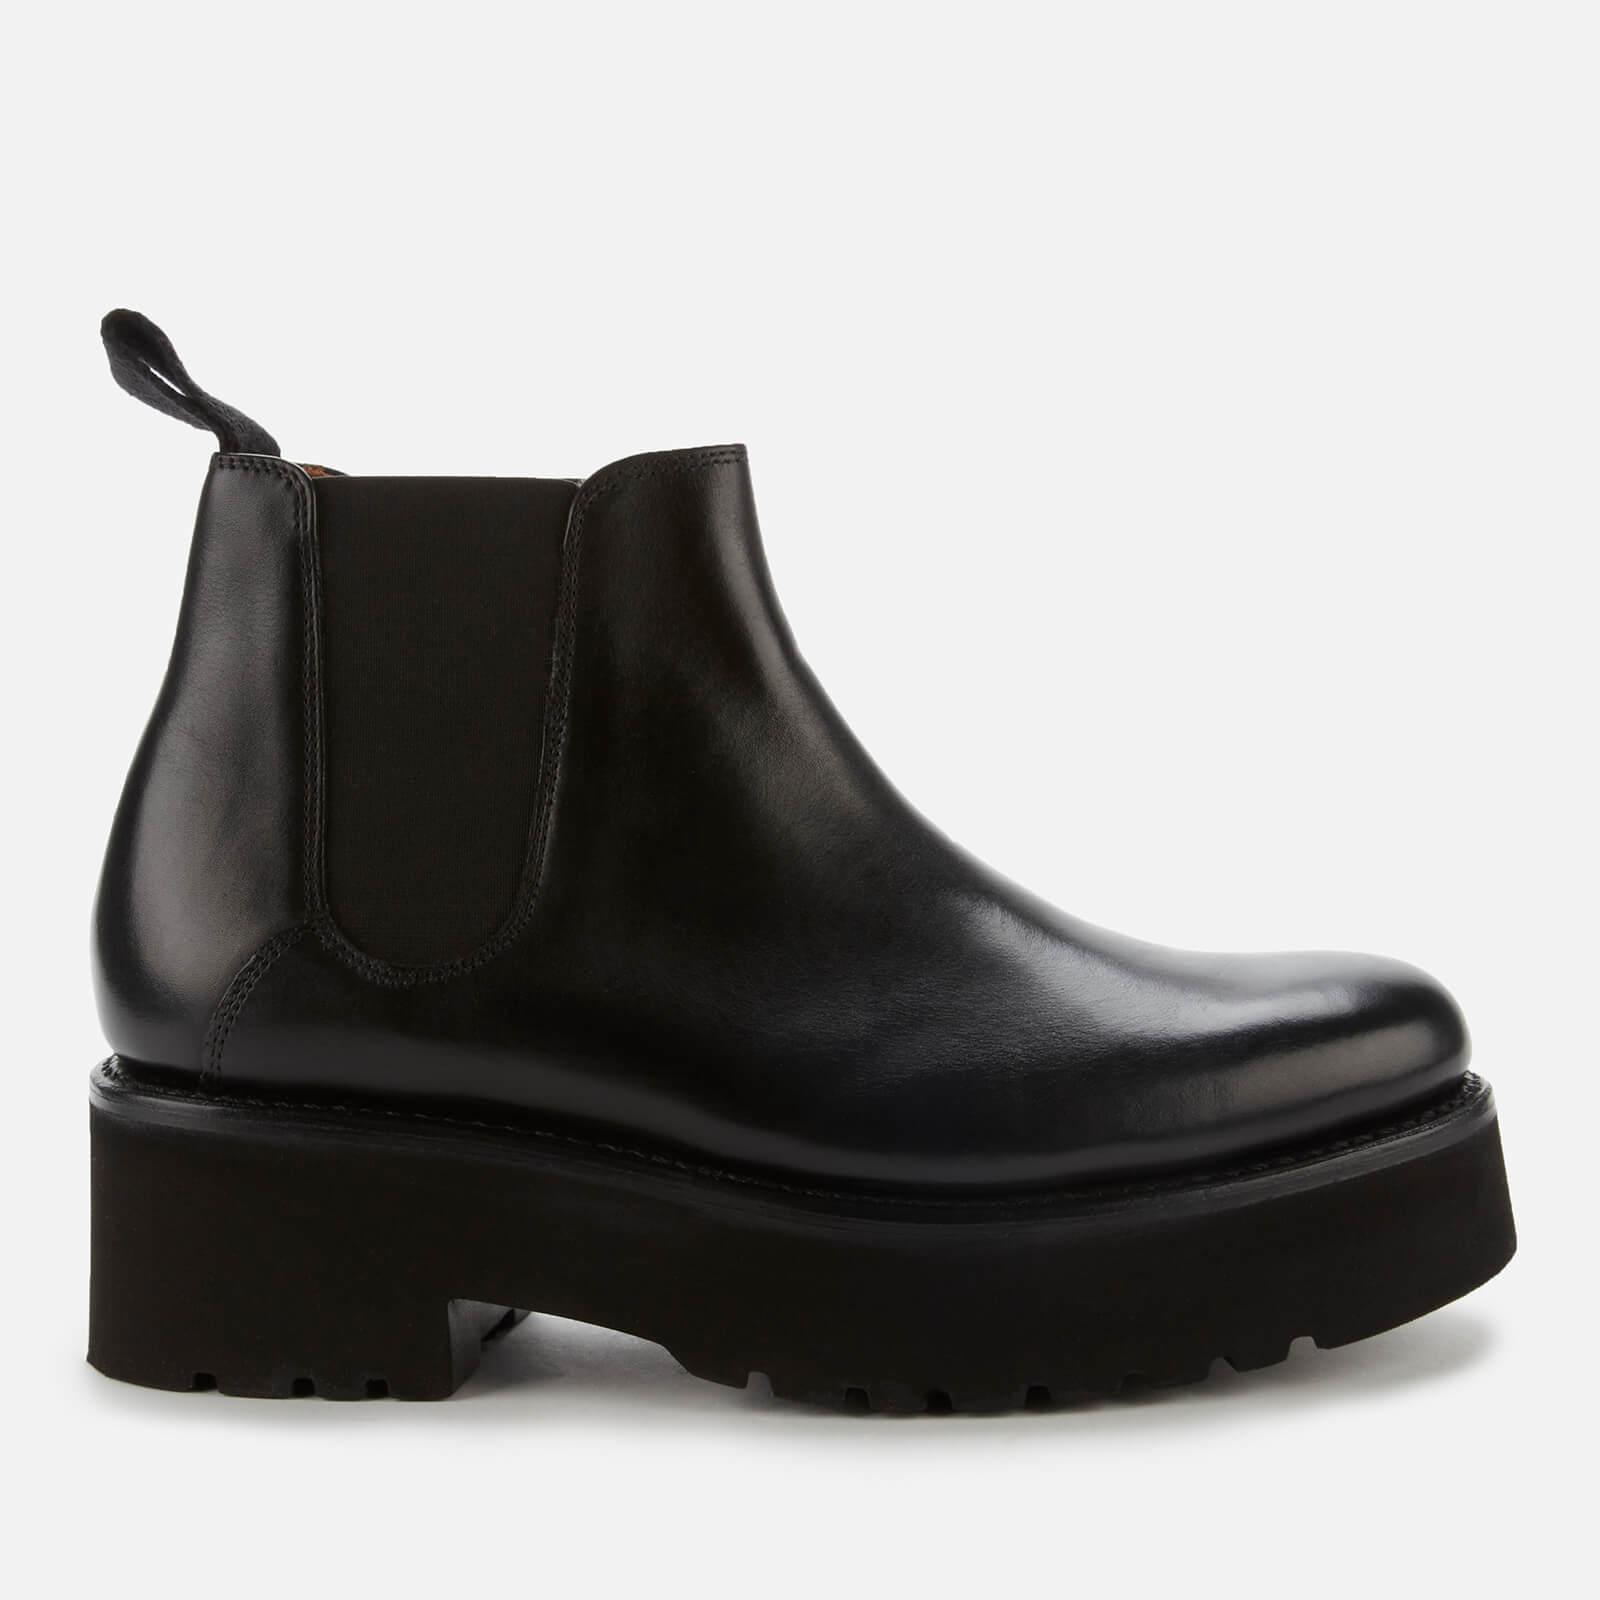 Grenson Naomi Leather Chelsea Boots in Black - Lyst